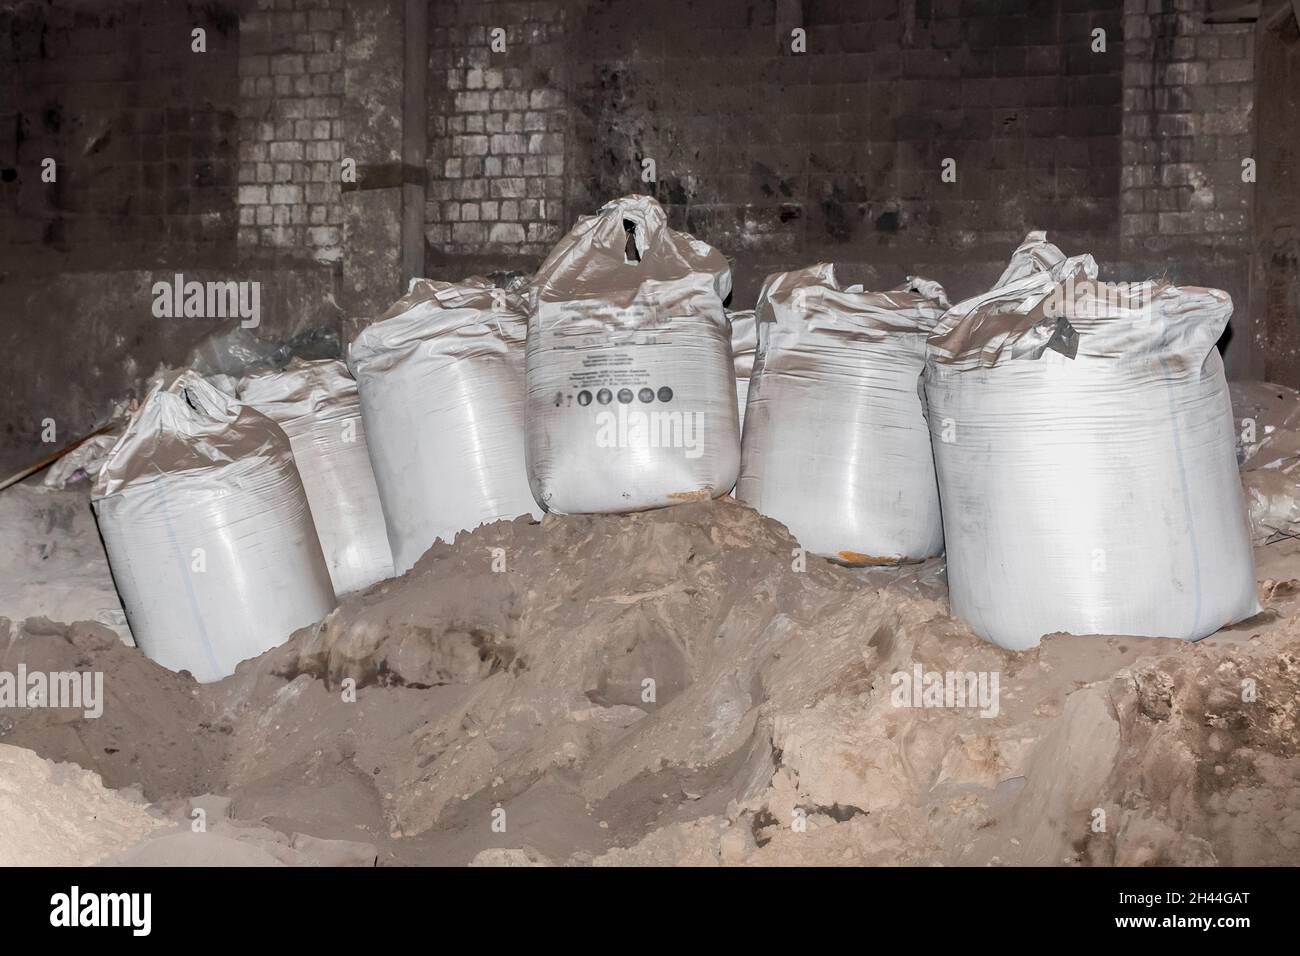 Bentonite clay powder packed in bags at an industrial plant for processing sand, soil and land. Stock Photo